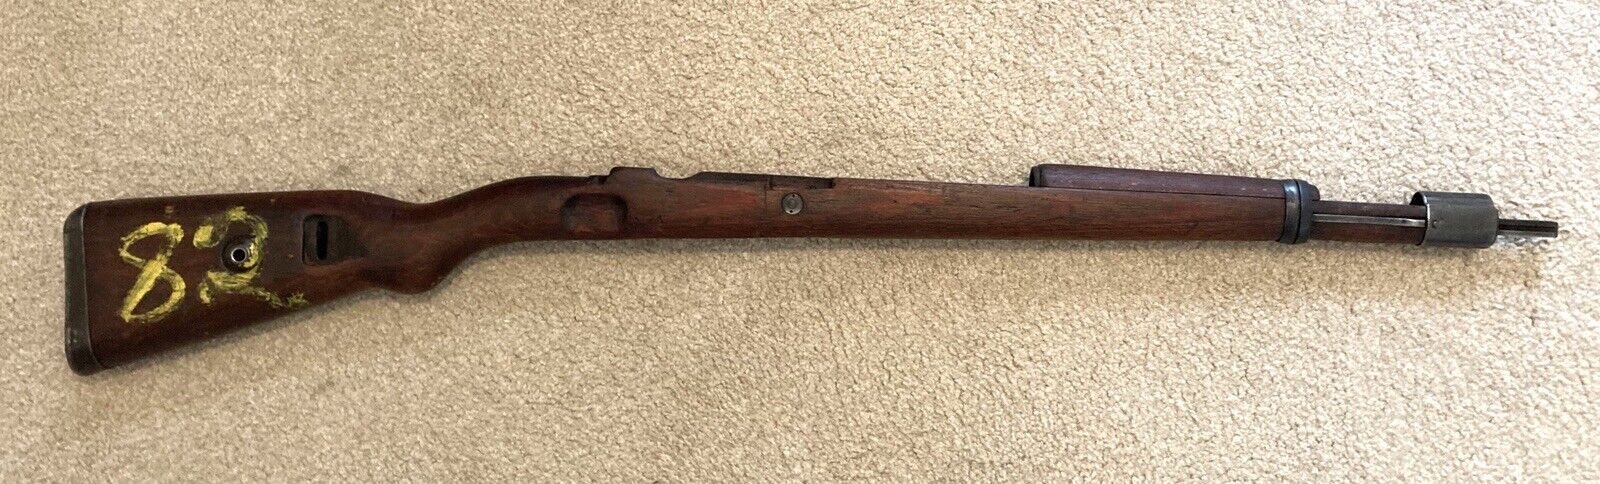 Mauser K98 Stock Set with Hardware